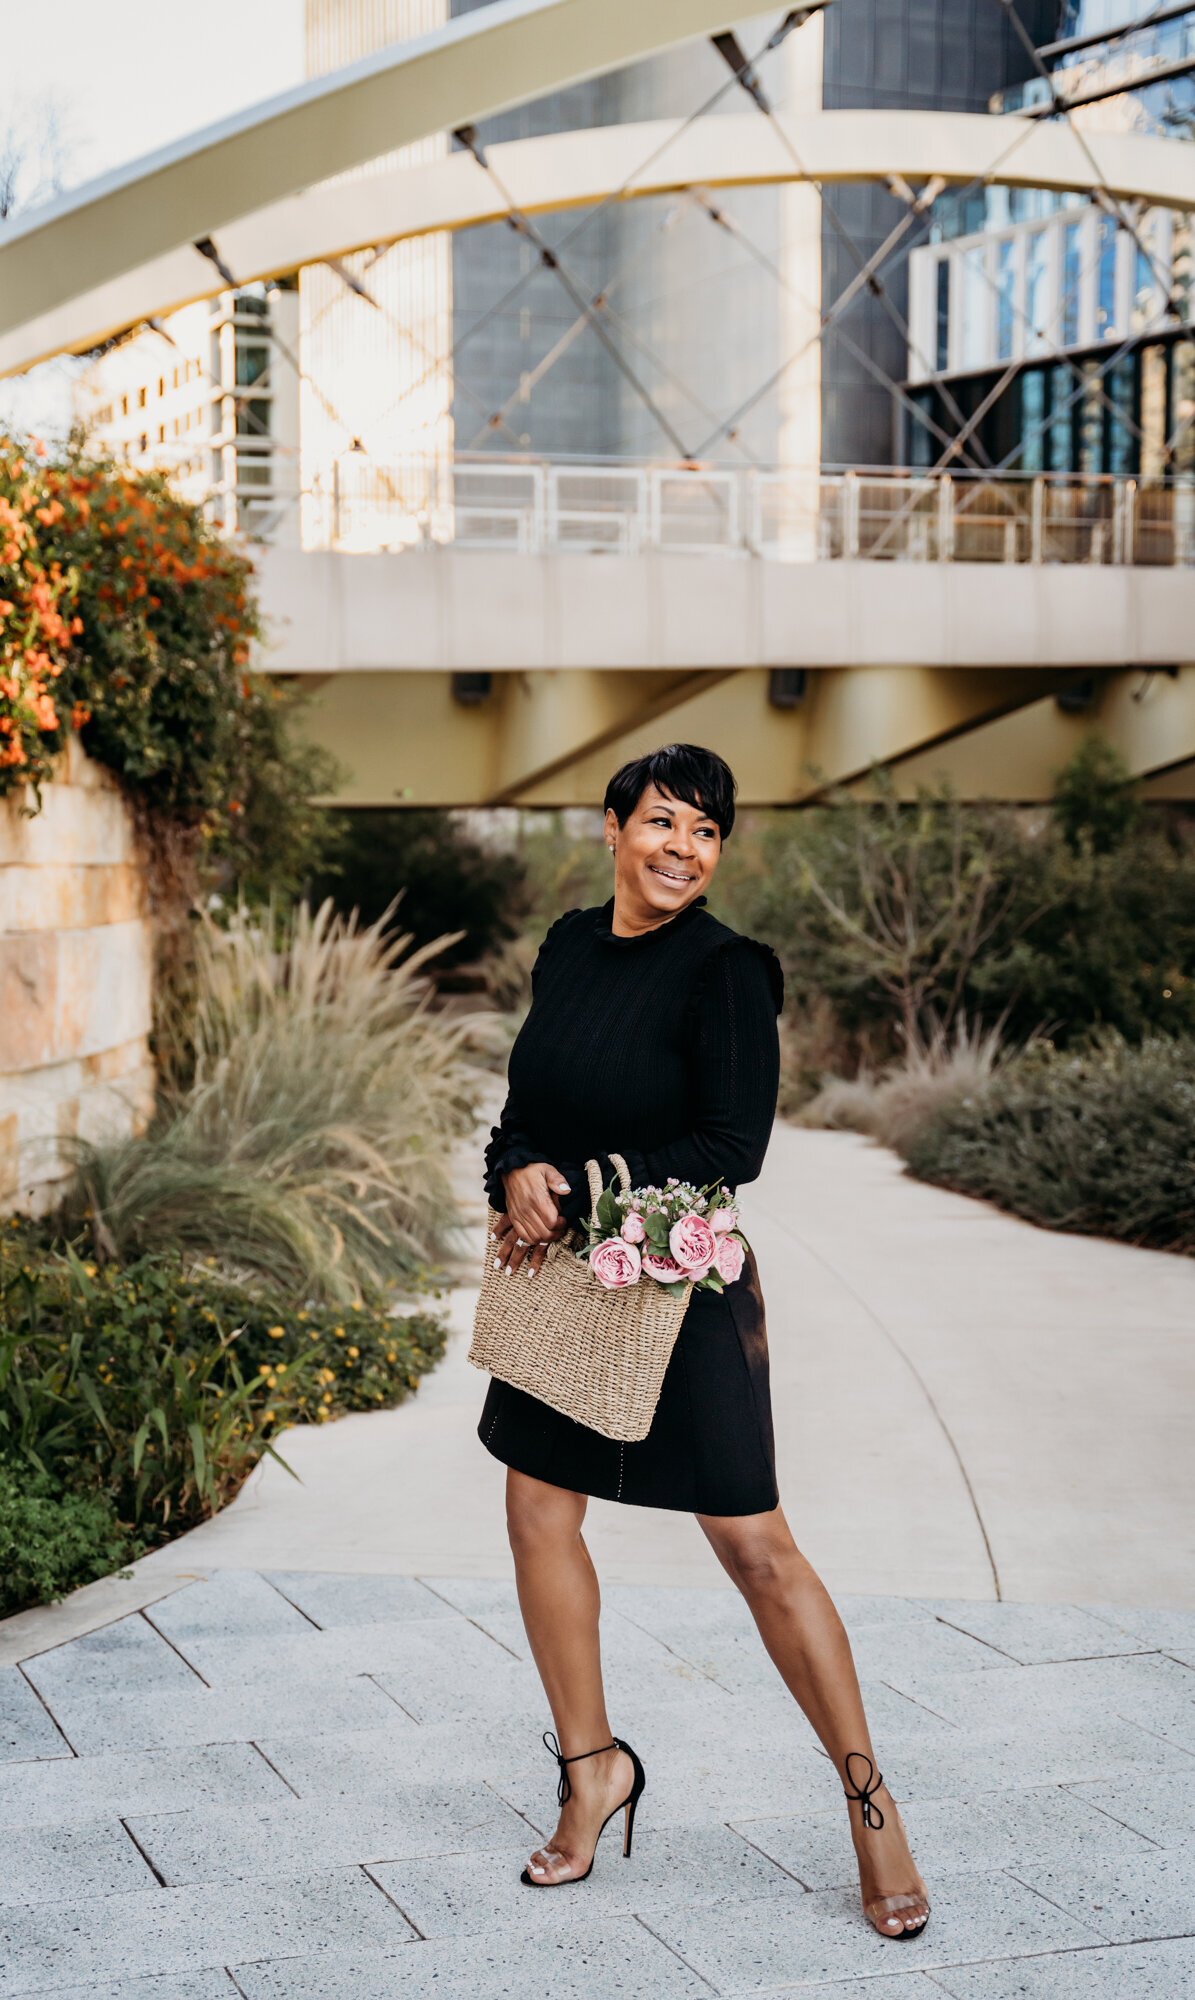 Branding Photographer, a woman dressed up holds a bag with flowers outside